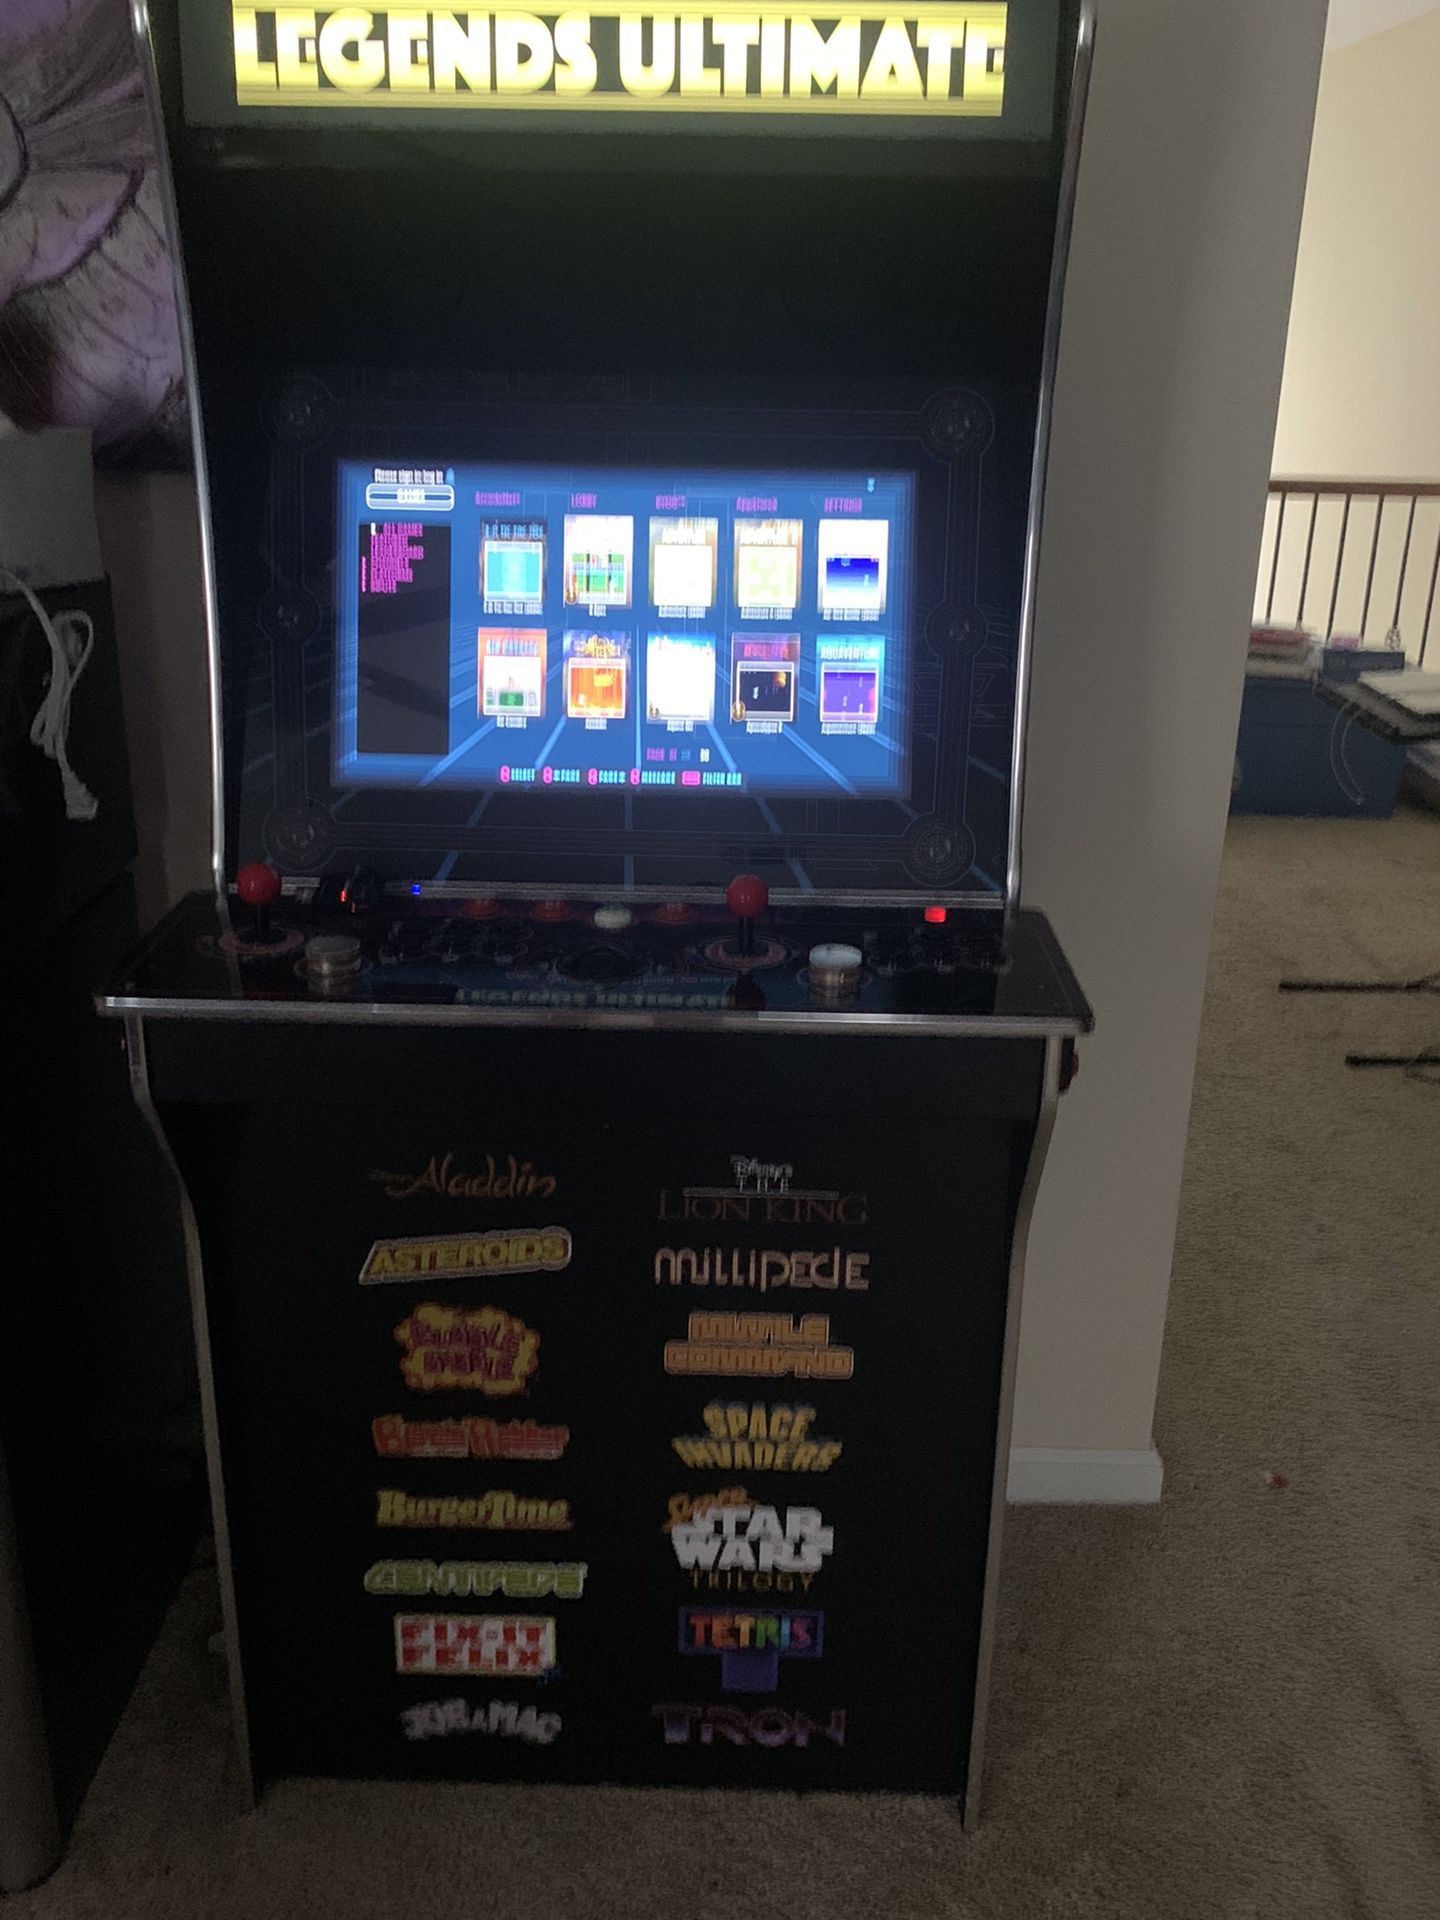 $650 Legends Ultimate Arcade, Full Size Game Machine, Home Arcade, Classic Retro Video Games, Over 300 Licensed Arcade and Console Games, Action Fight